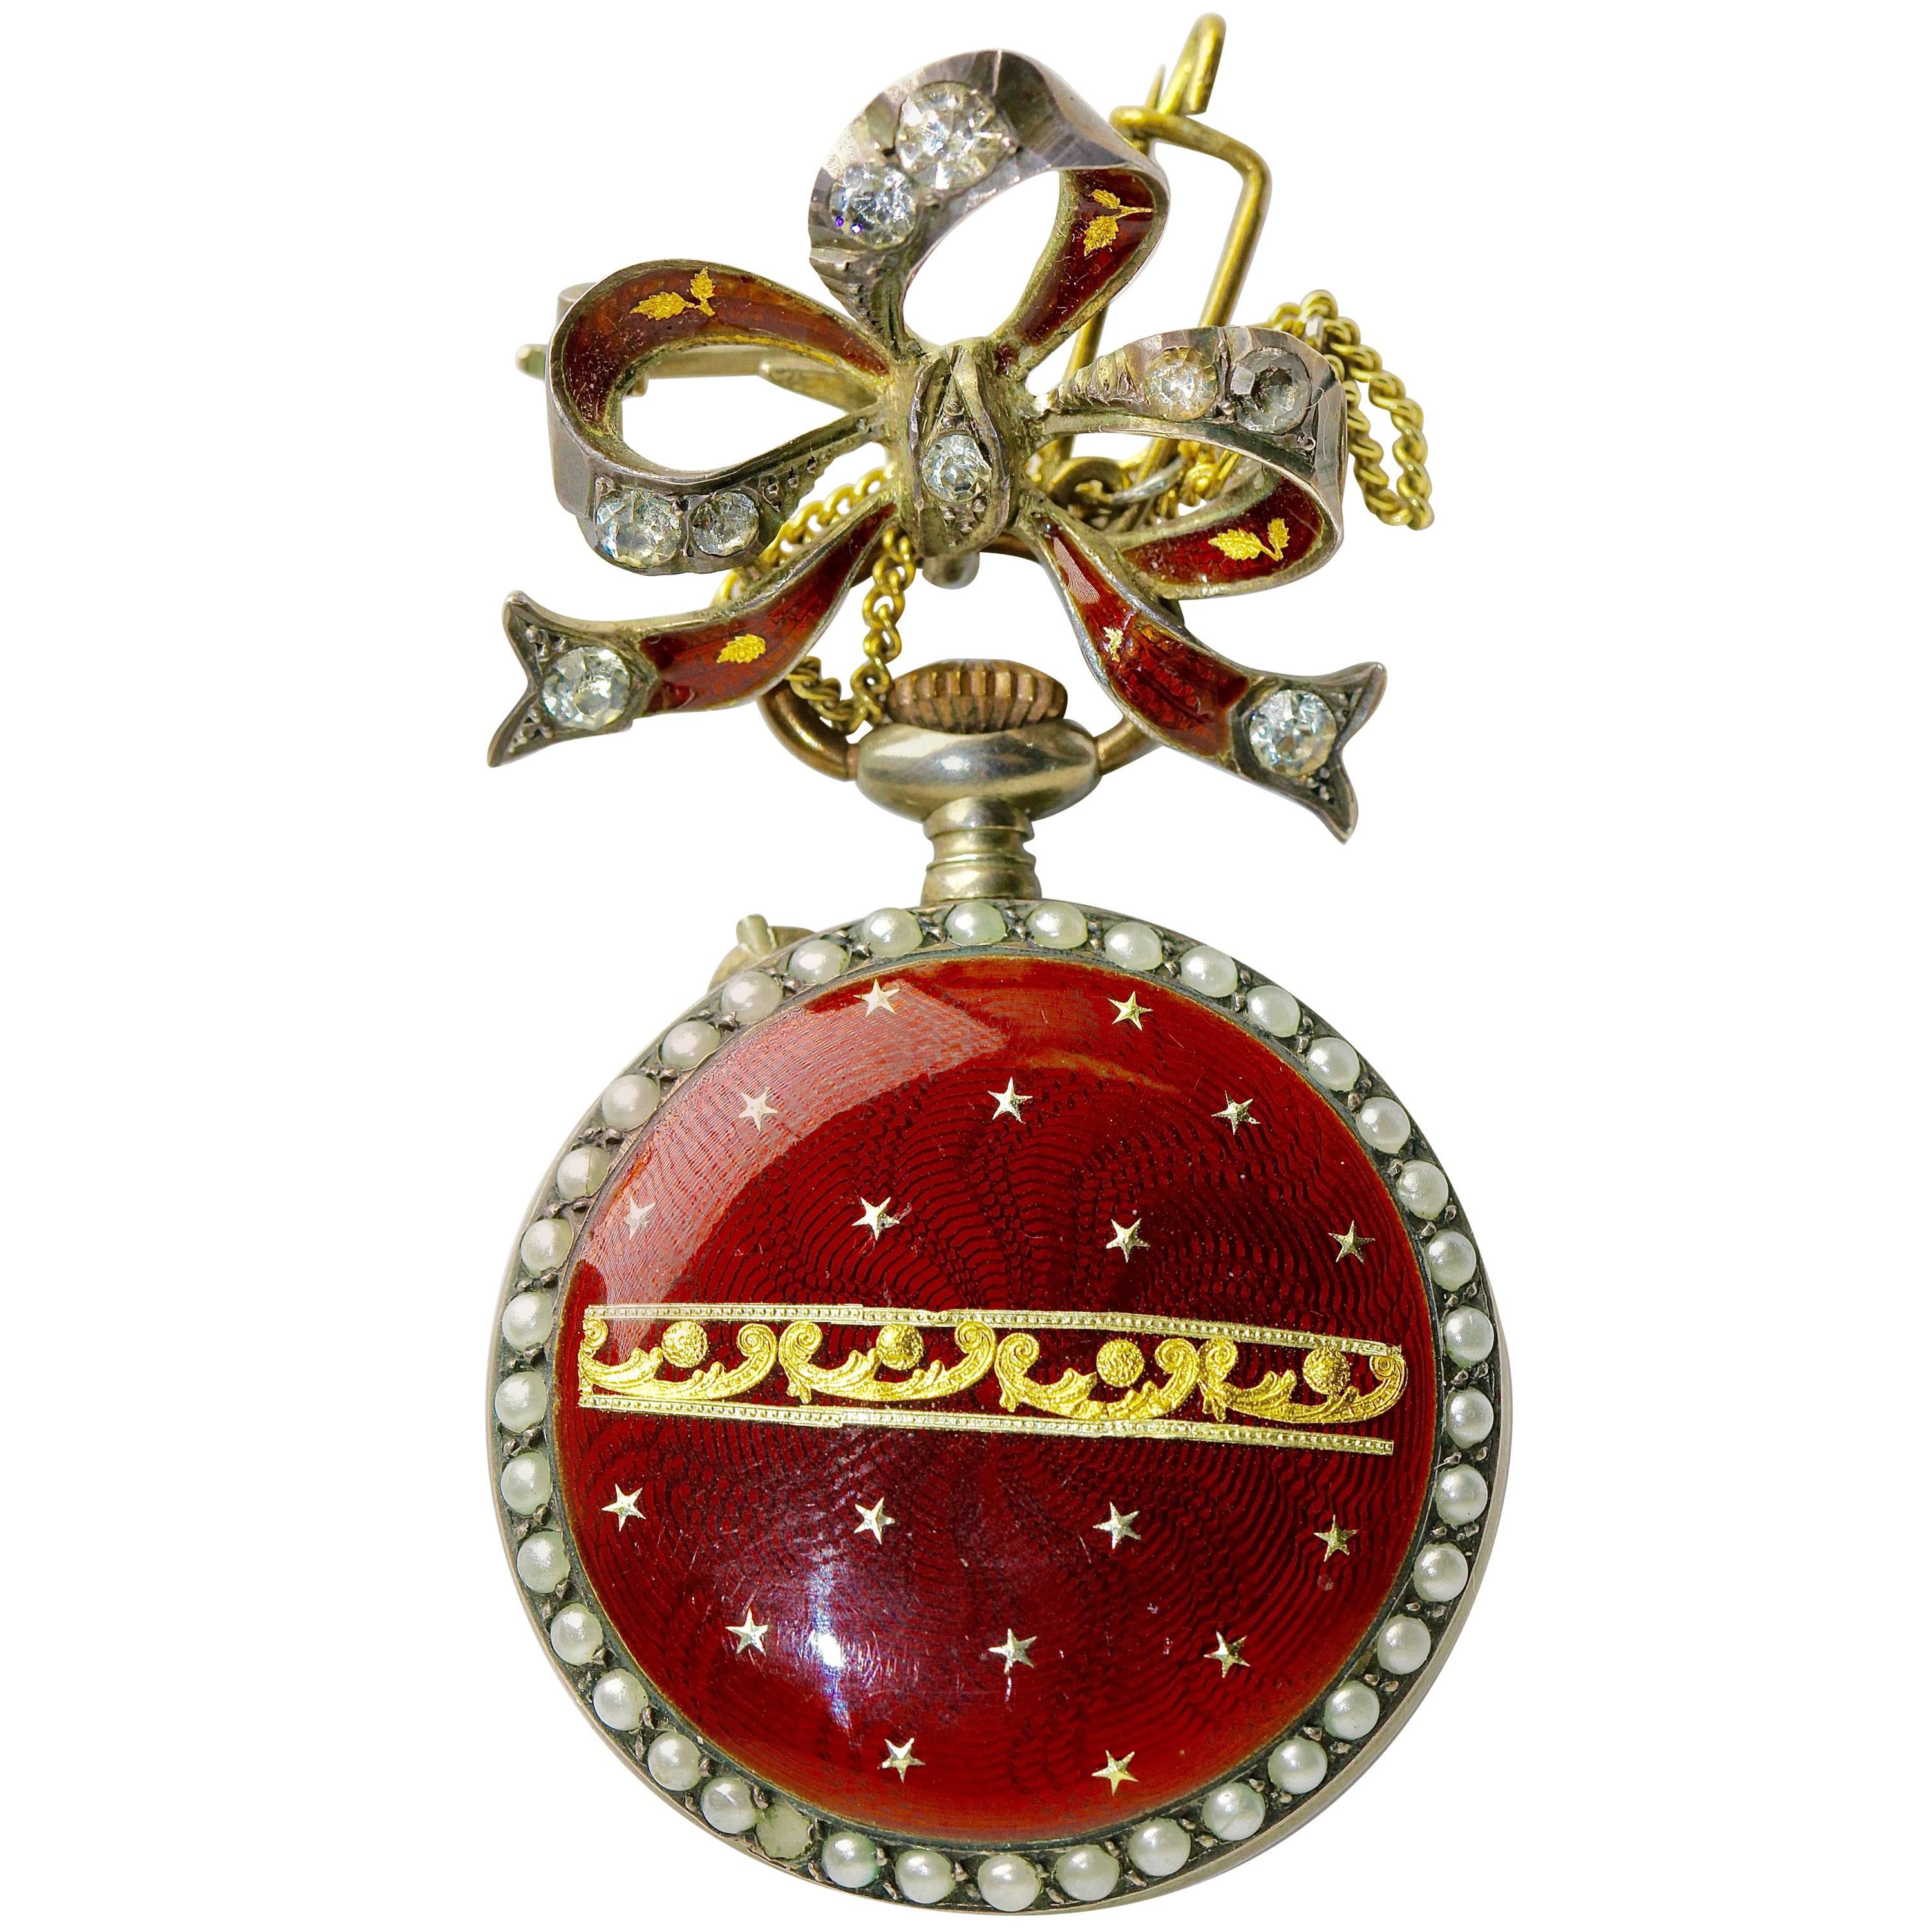 19th Century Antique Ladies Pocket Watch with Enamel and Pearls, as a Brooch